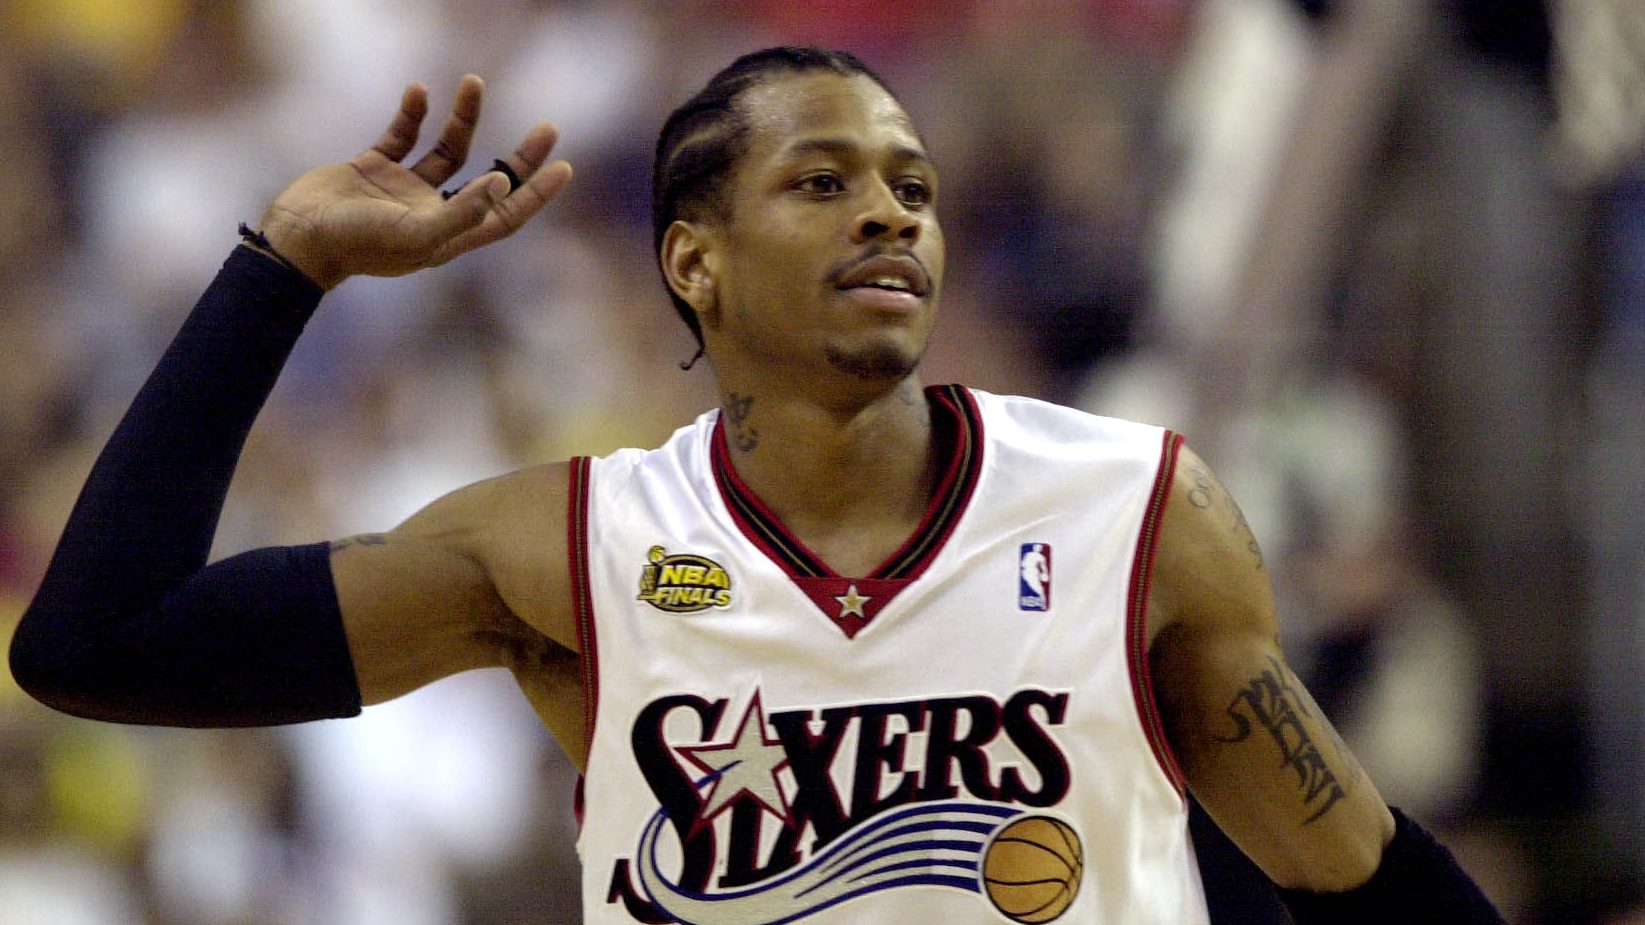 Allen Iverson of the Philadelphia 76ers arrives at the 2004 NBA News  Photo - Getty Images